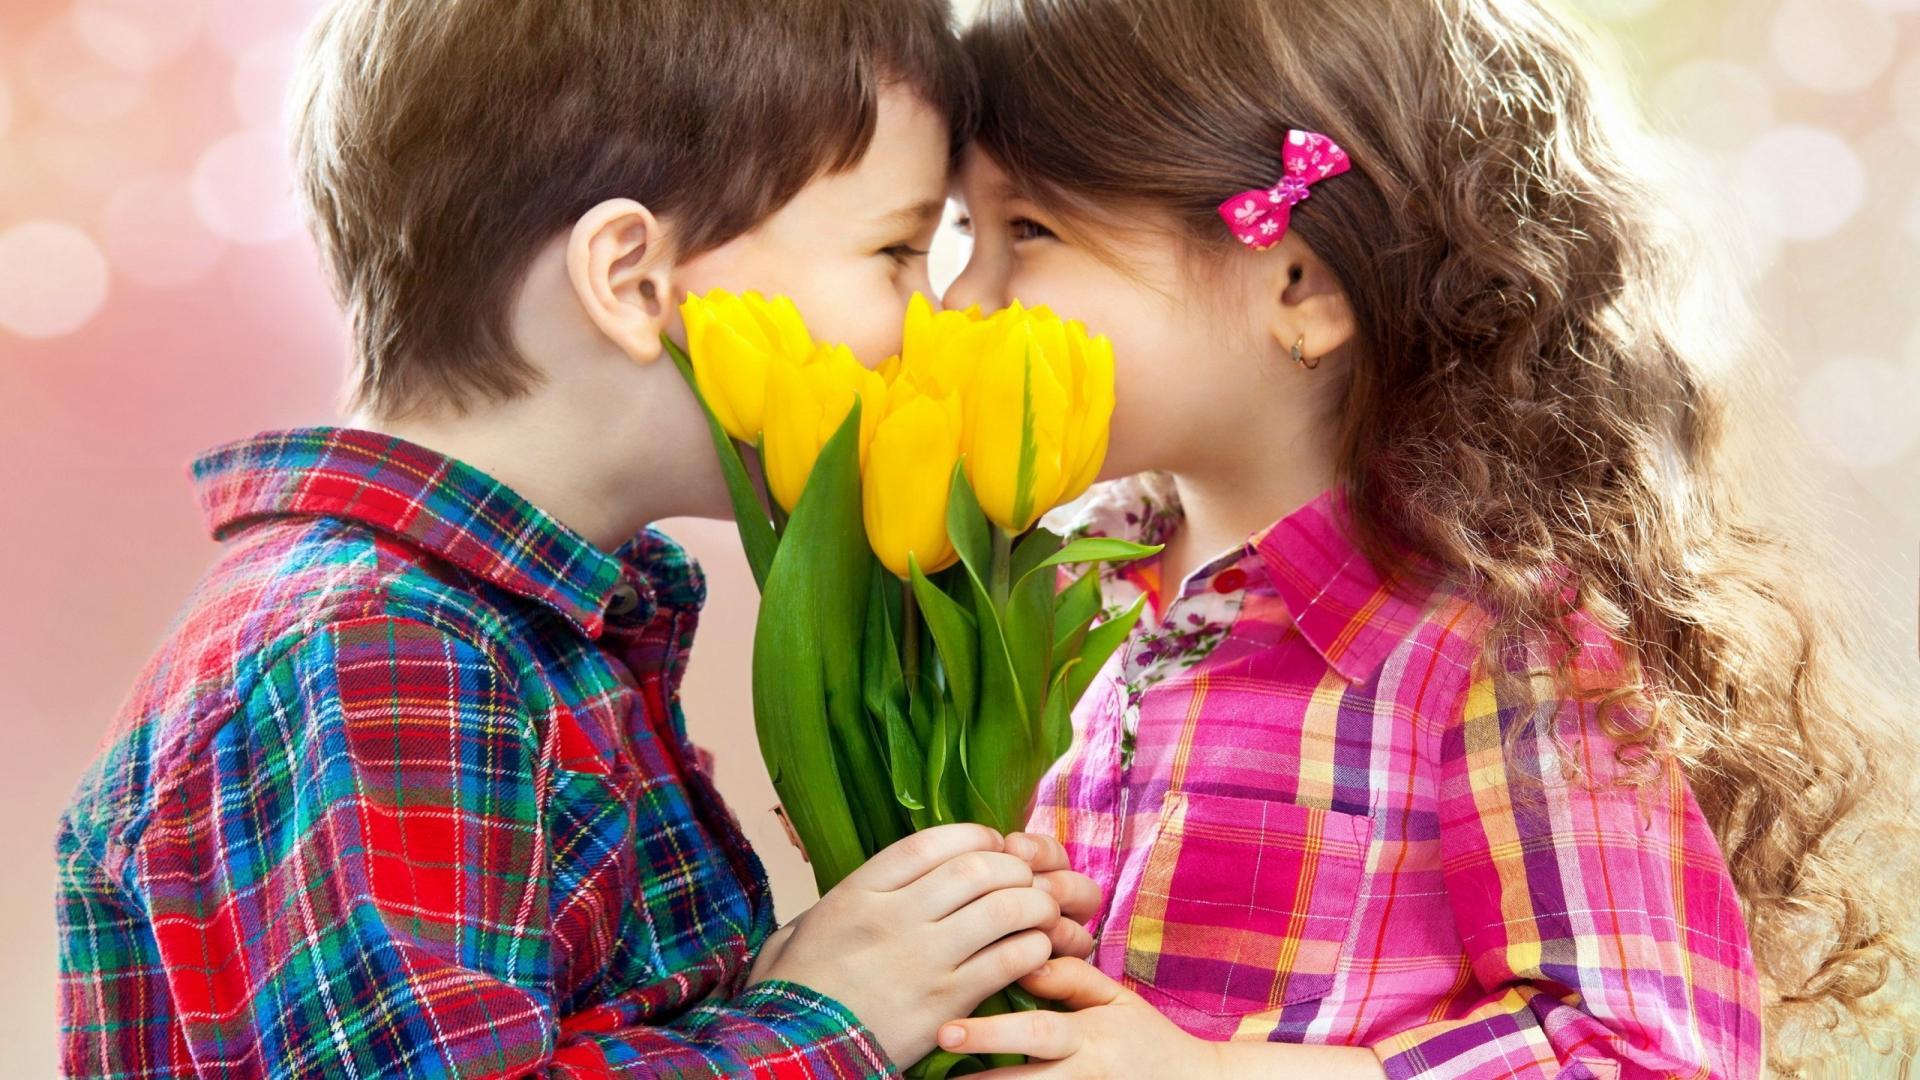 Cute Kids Girl And Boy Kissing HD Wallpaper Search More High